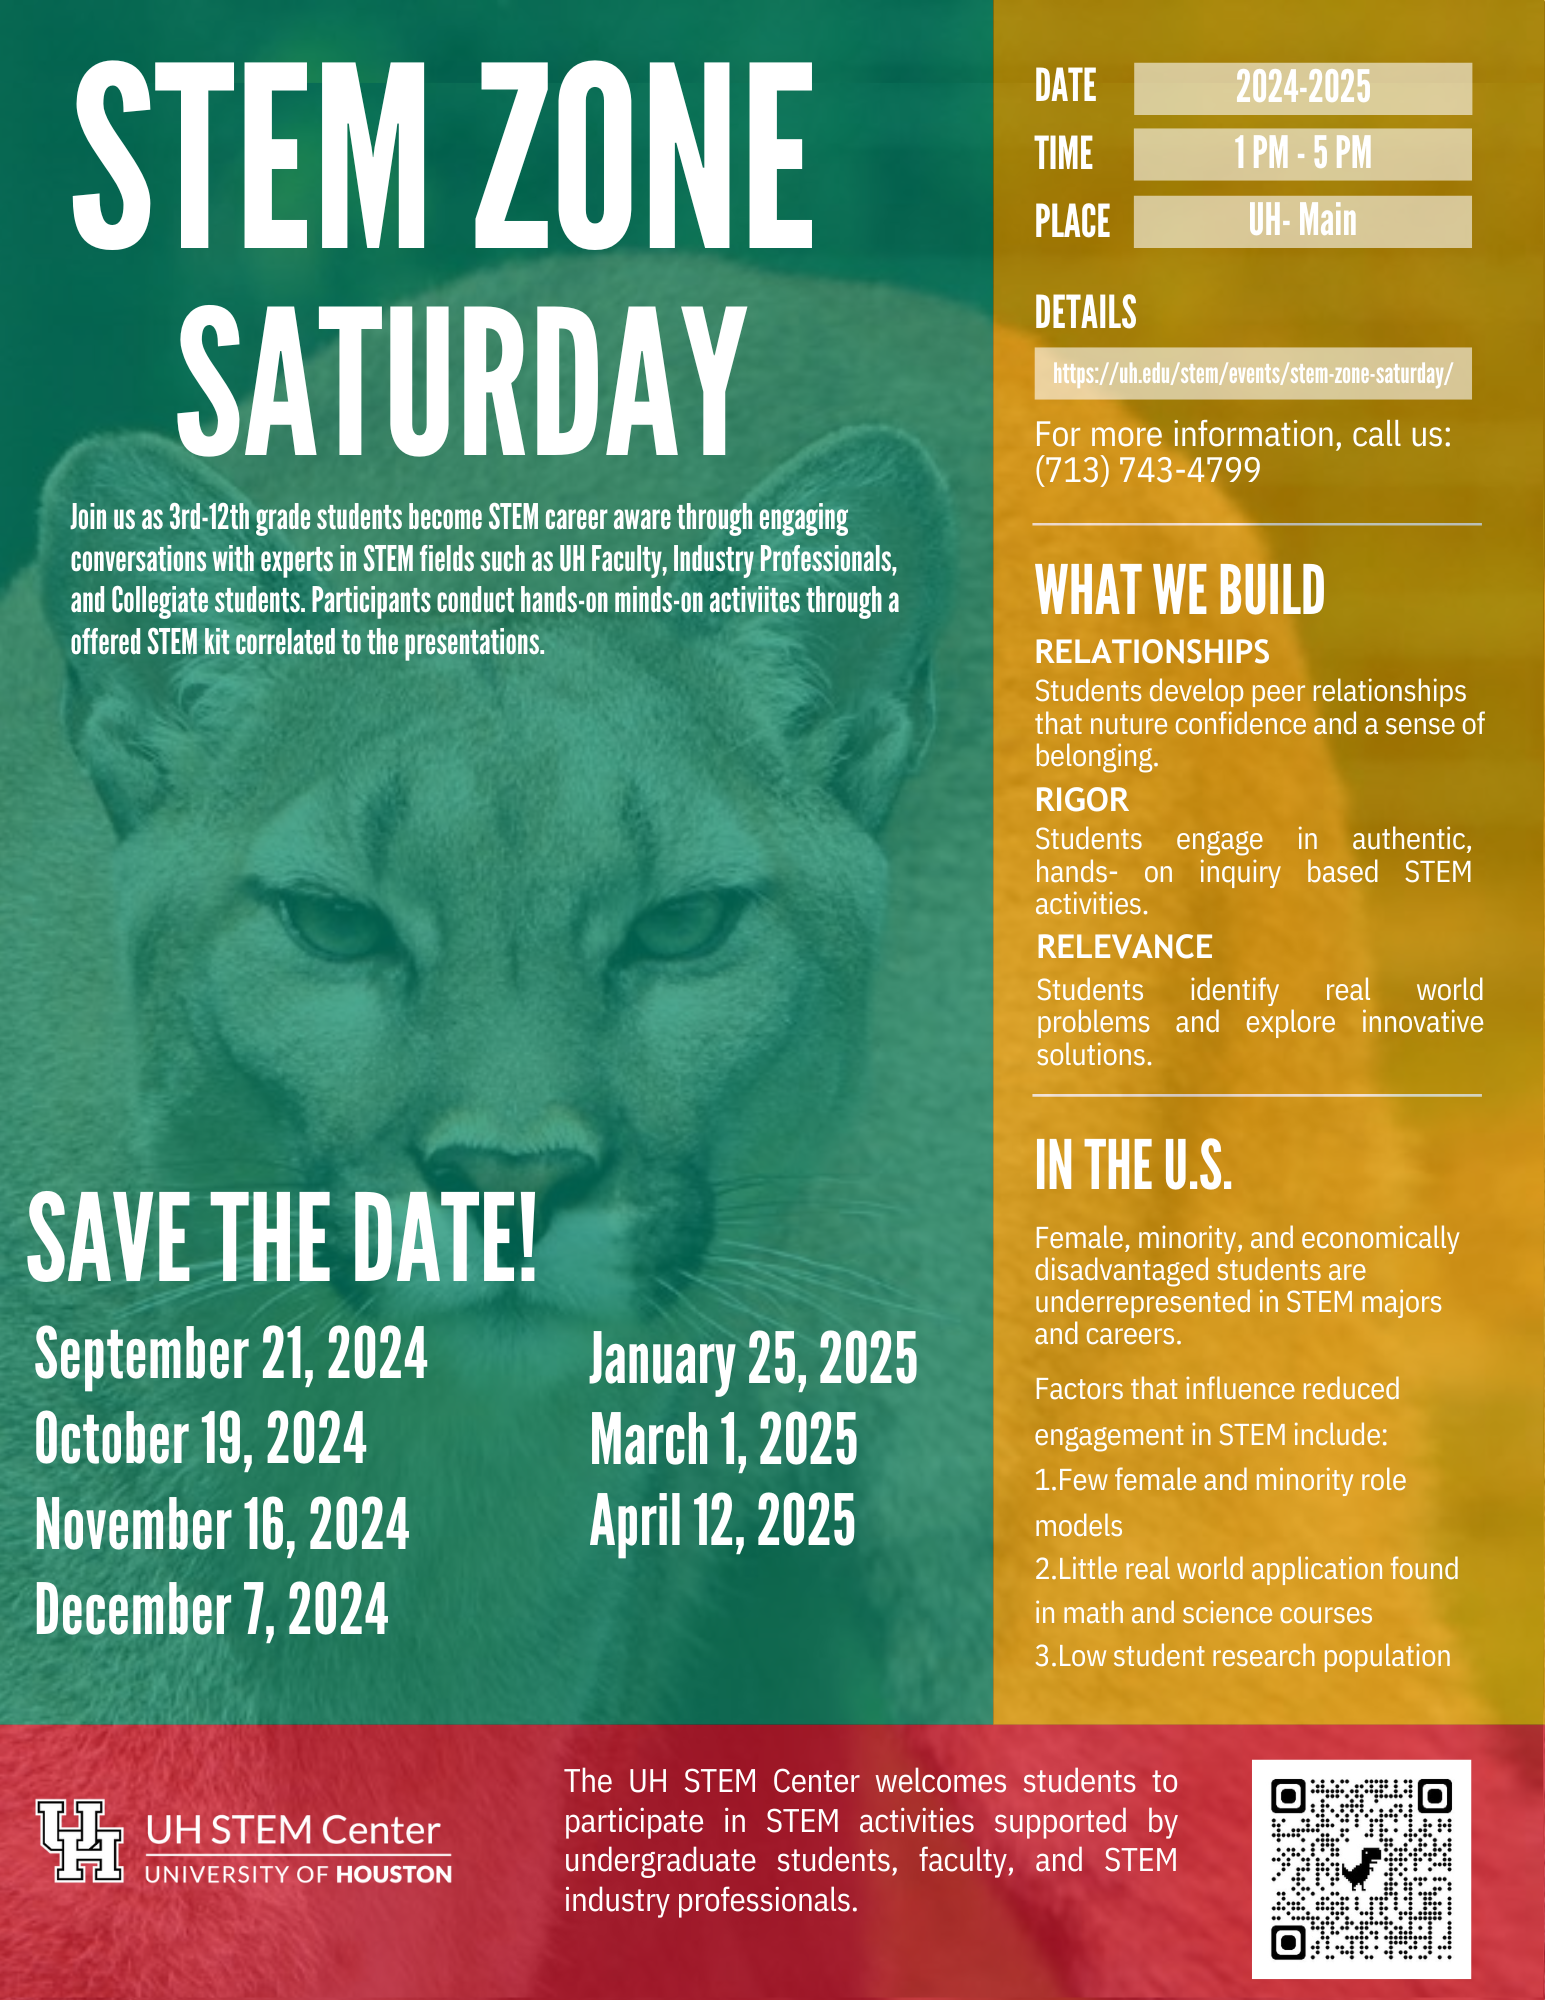 STEM Zone Saturday future event dates flyer. Save the date! 